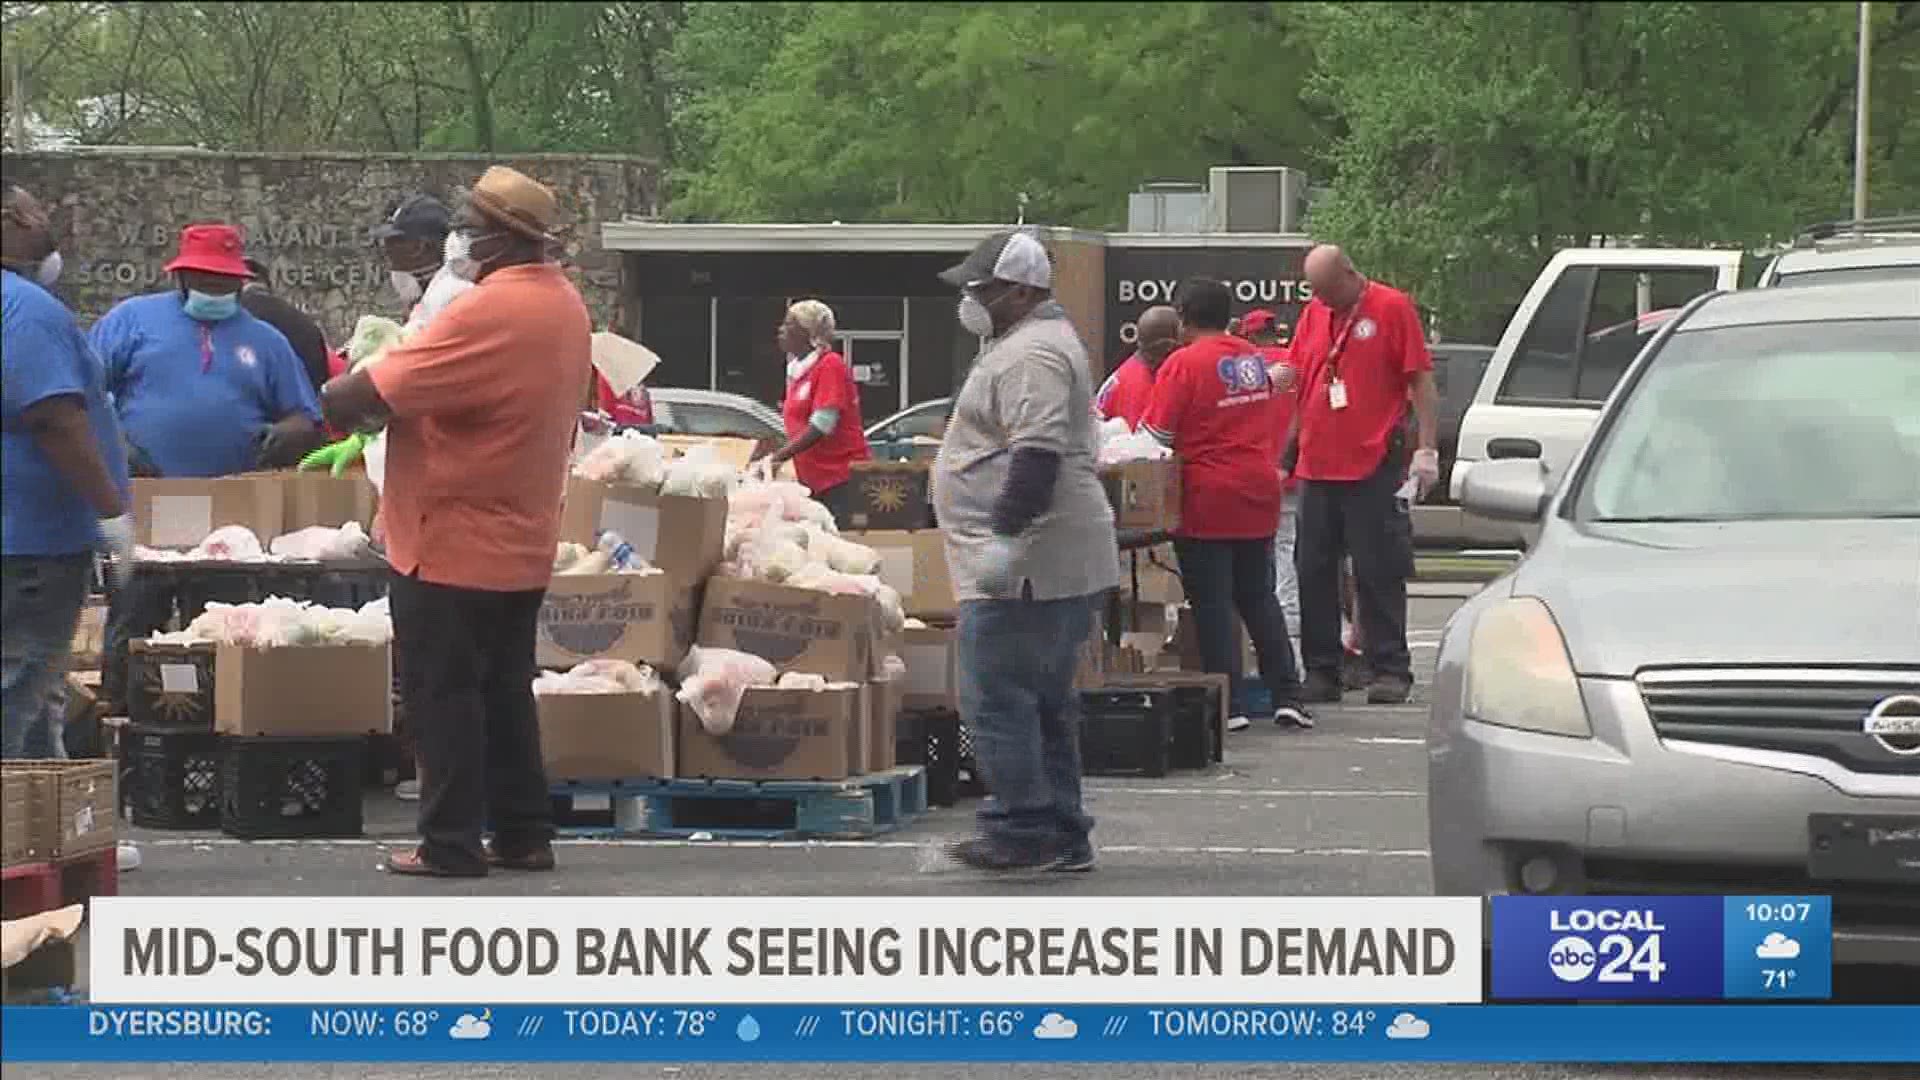 "The need is still there. We are still seeing a long line of cars at our mobile distributions," said Cathy Pope Director of the Mid-South Food Bank